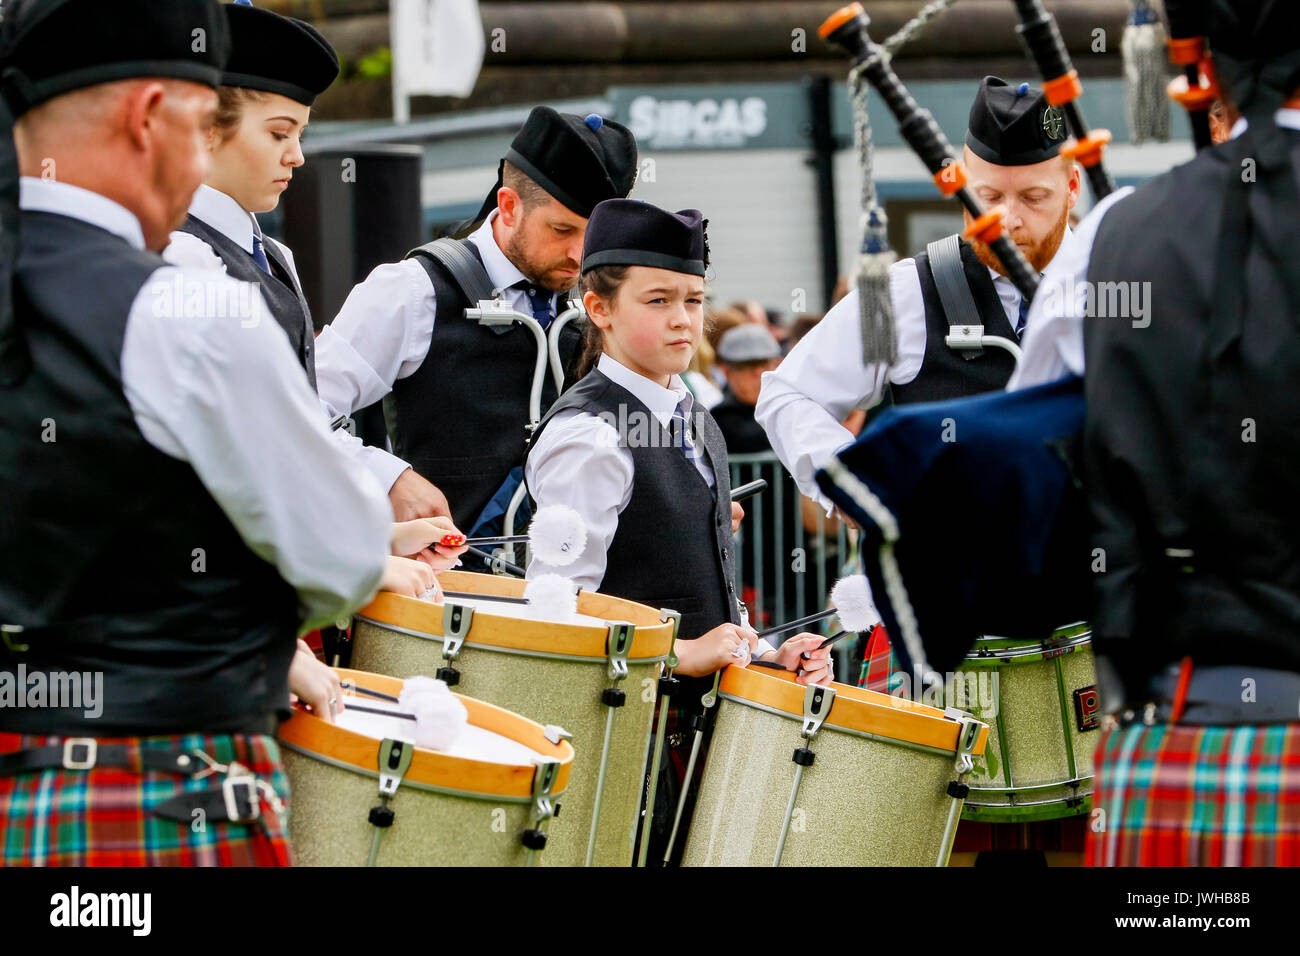 Glasgow, UK. 12th Aug, 2017. It was estimated that more than 10,000 spectators turned out to watch the final day of "Piping Live" and the World Pipe Band Championships, an Internationally reknowned competition, take place in Glasgow Green as the finale to a week of entertainment and free concerts that have taken place around Glasgow city centre. Despite the occasional heavy rain shower, play continued and spirits weren't dampened. Credit: Findlay/Alamy Live News Stock Photo